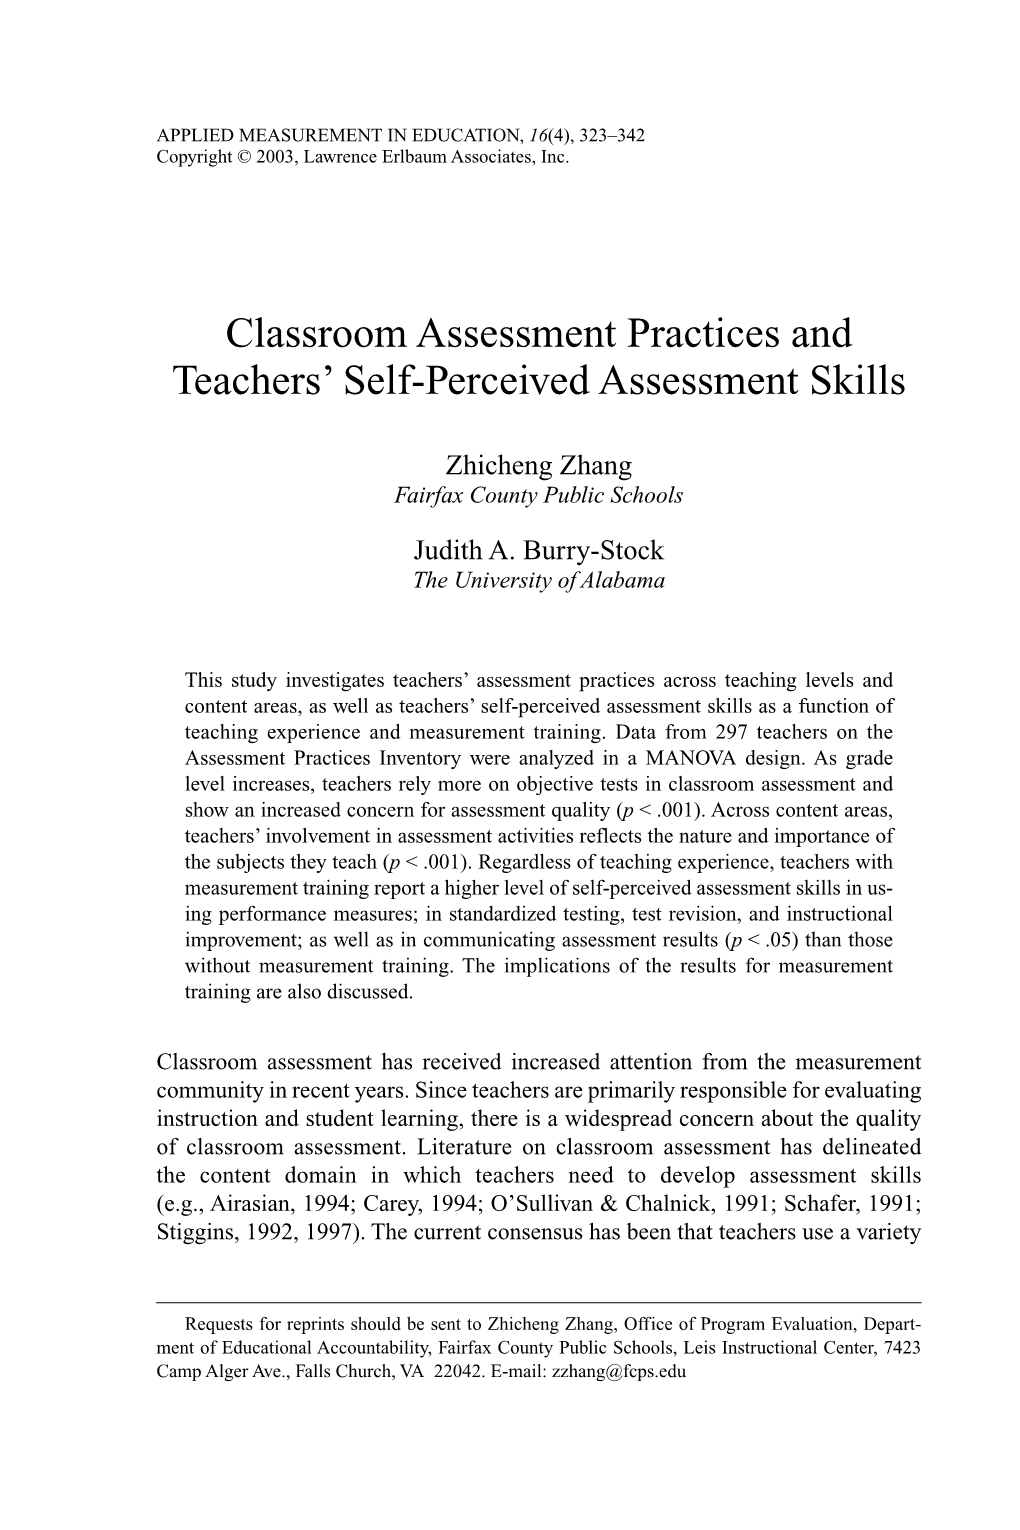 Classroom Assessment Practices and Teachers' Self-Perceived Assessment Skills